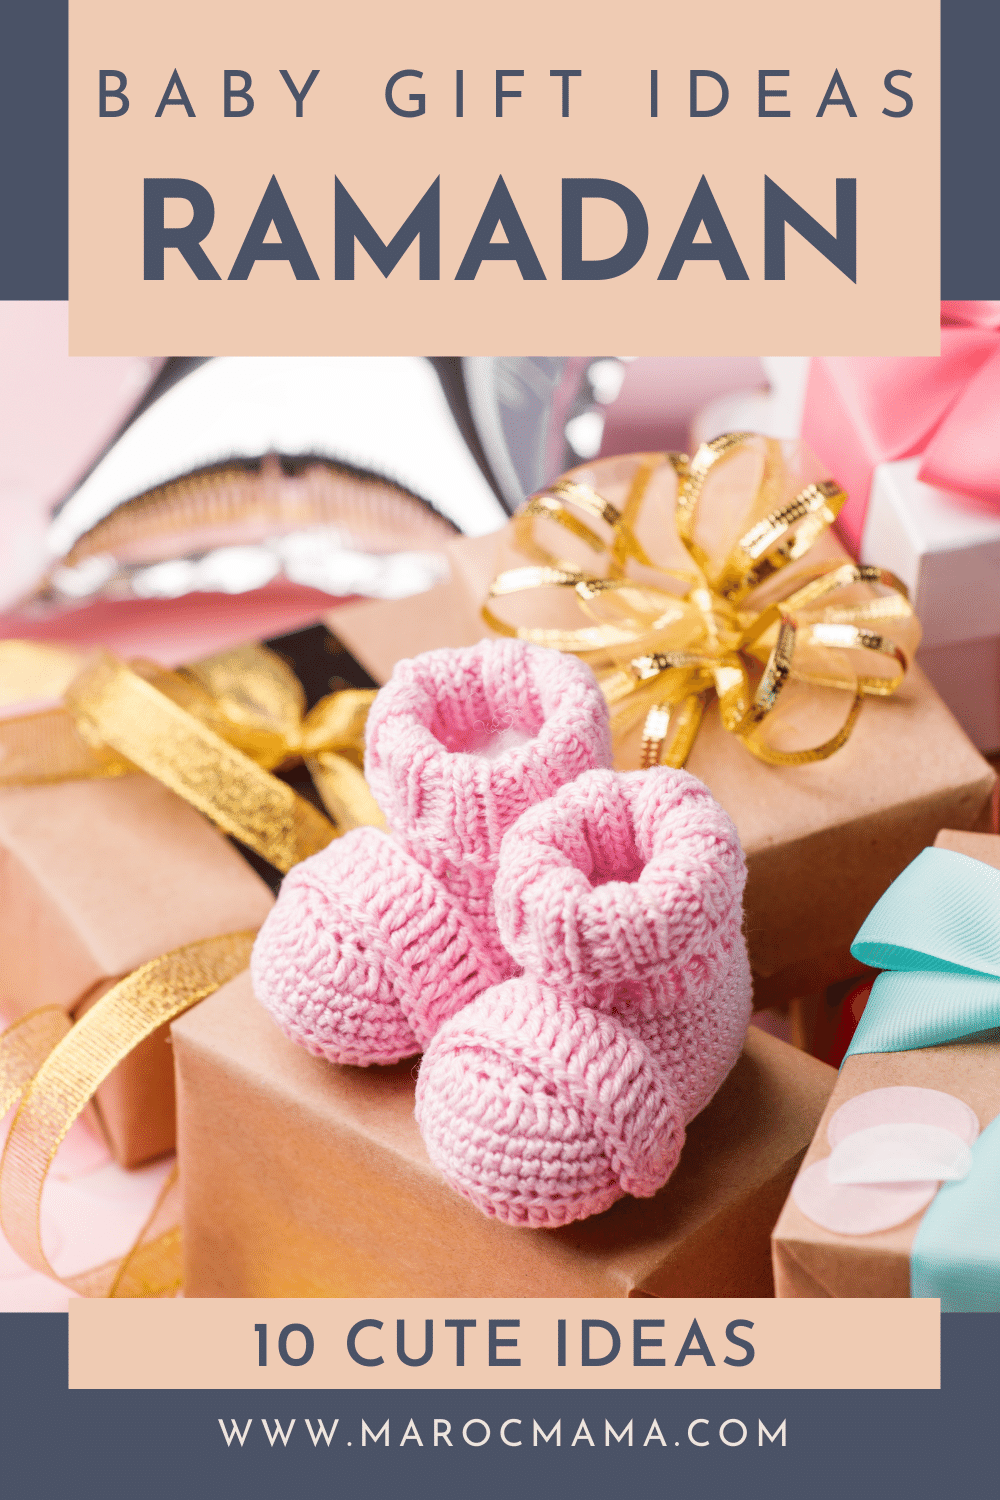 5 Ramadan gift ideas for the 9th friend or family you didn't invite for  Iftar